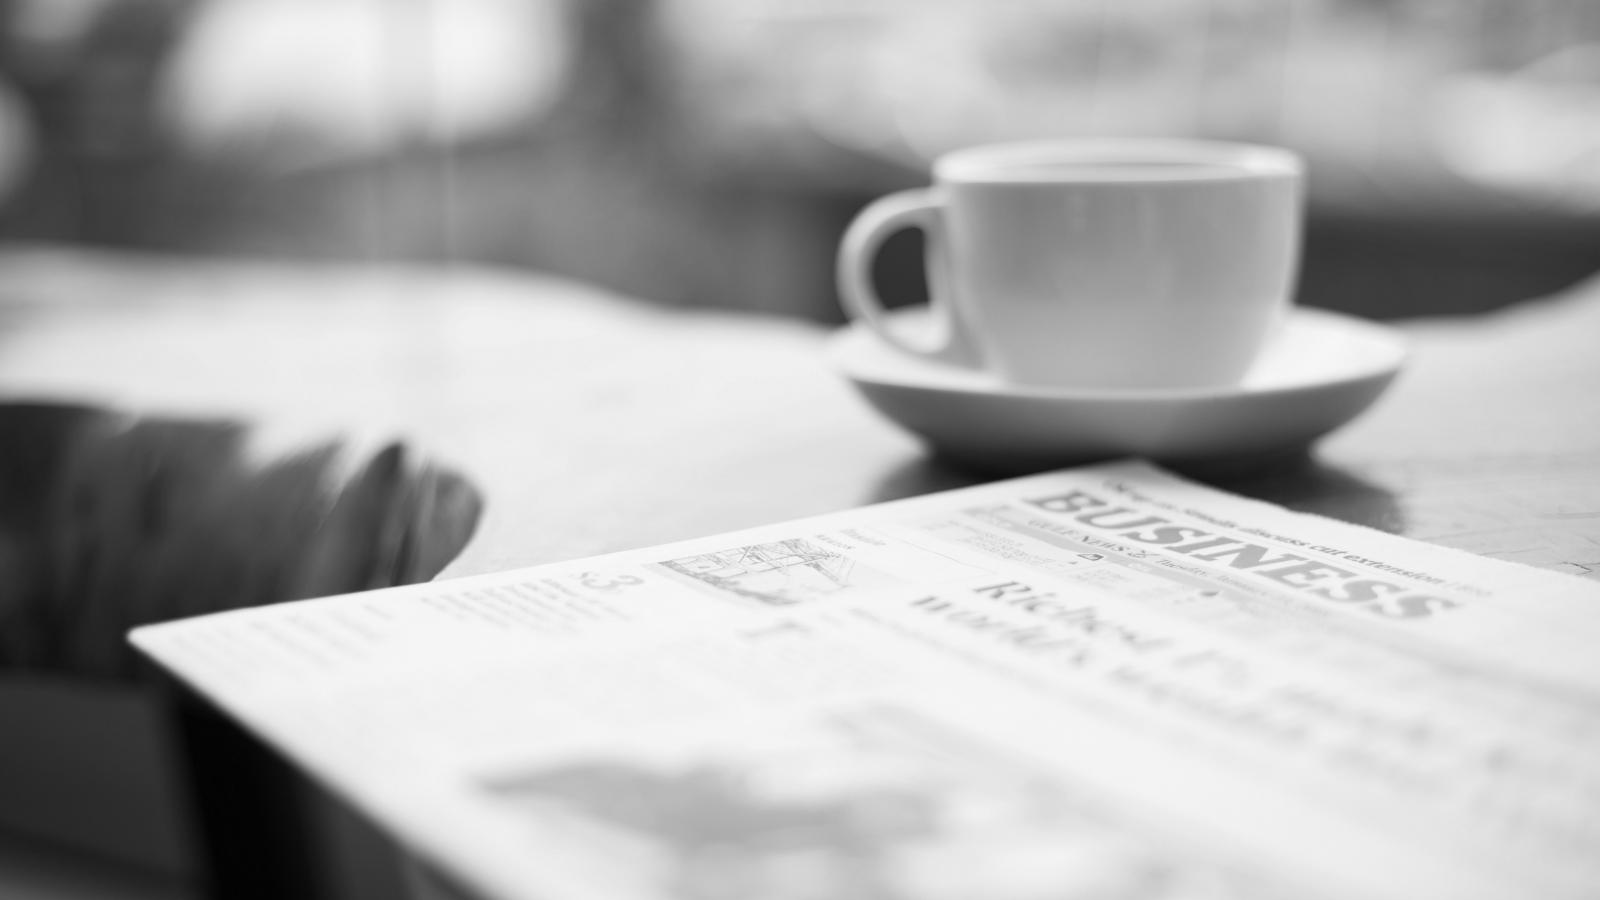 Newspaper and coffee cup